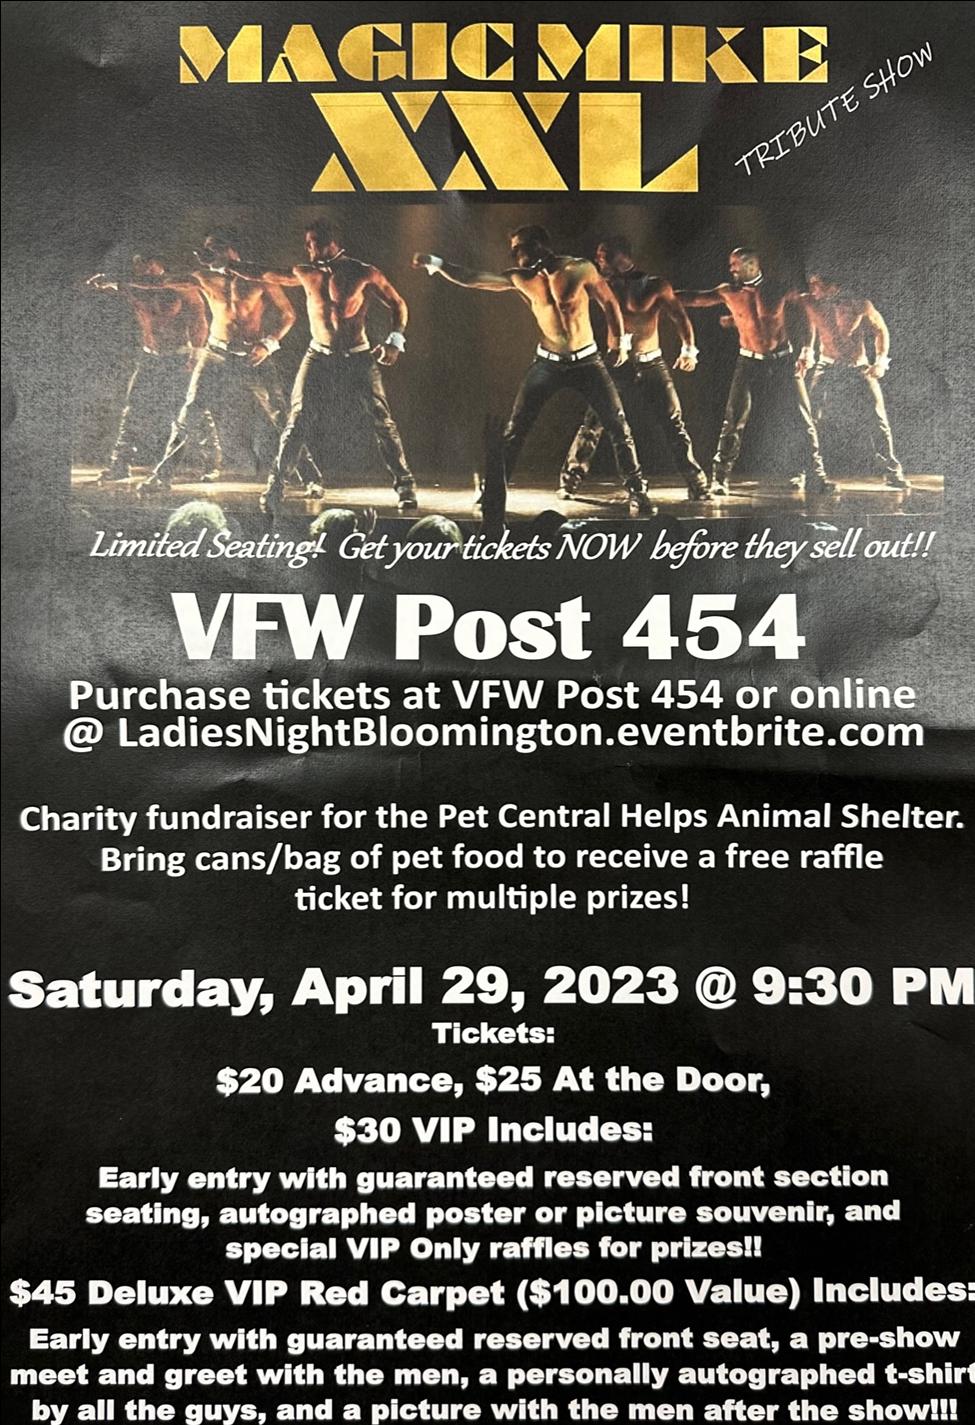 Magic Mike Tribute Show - VFW Fundraiser for Pet Central Helps!